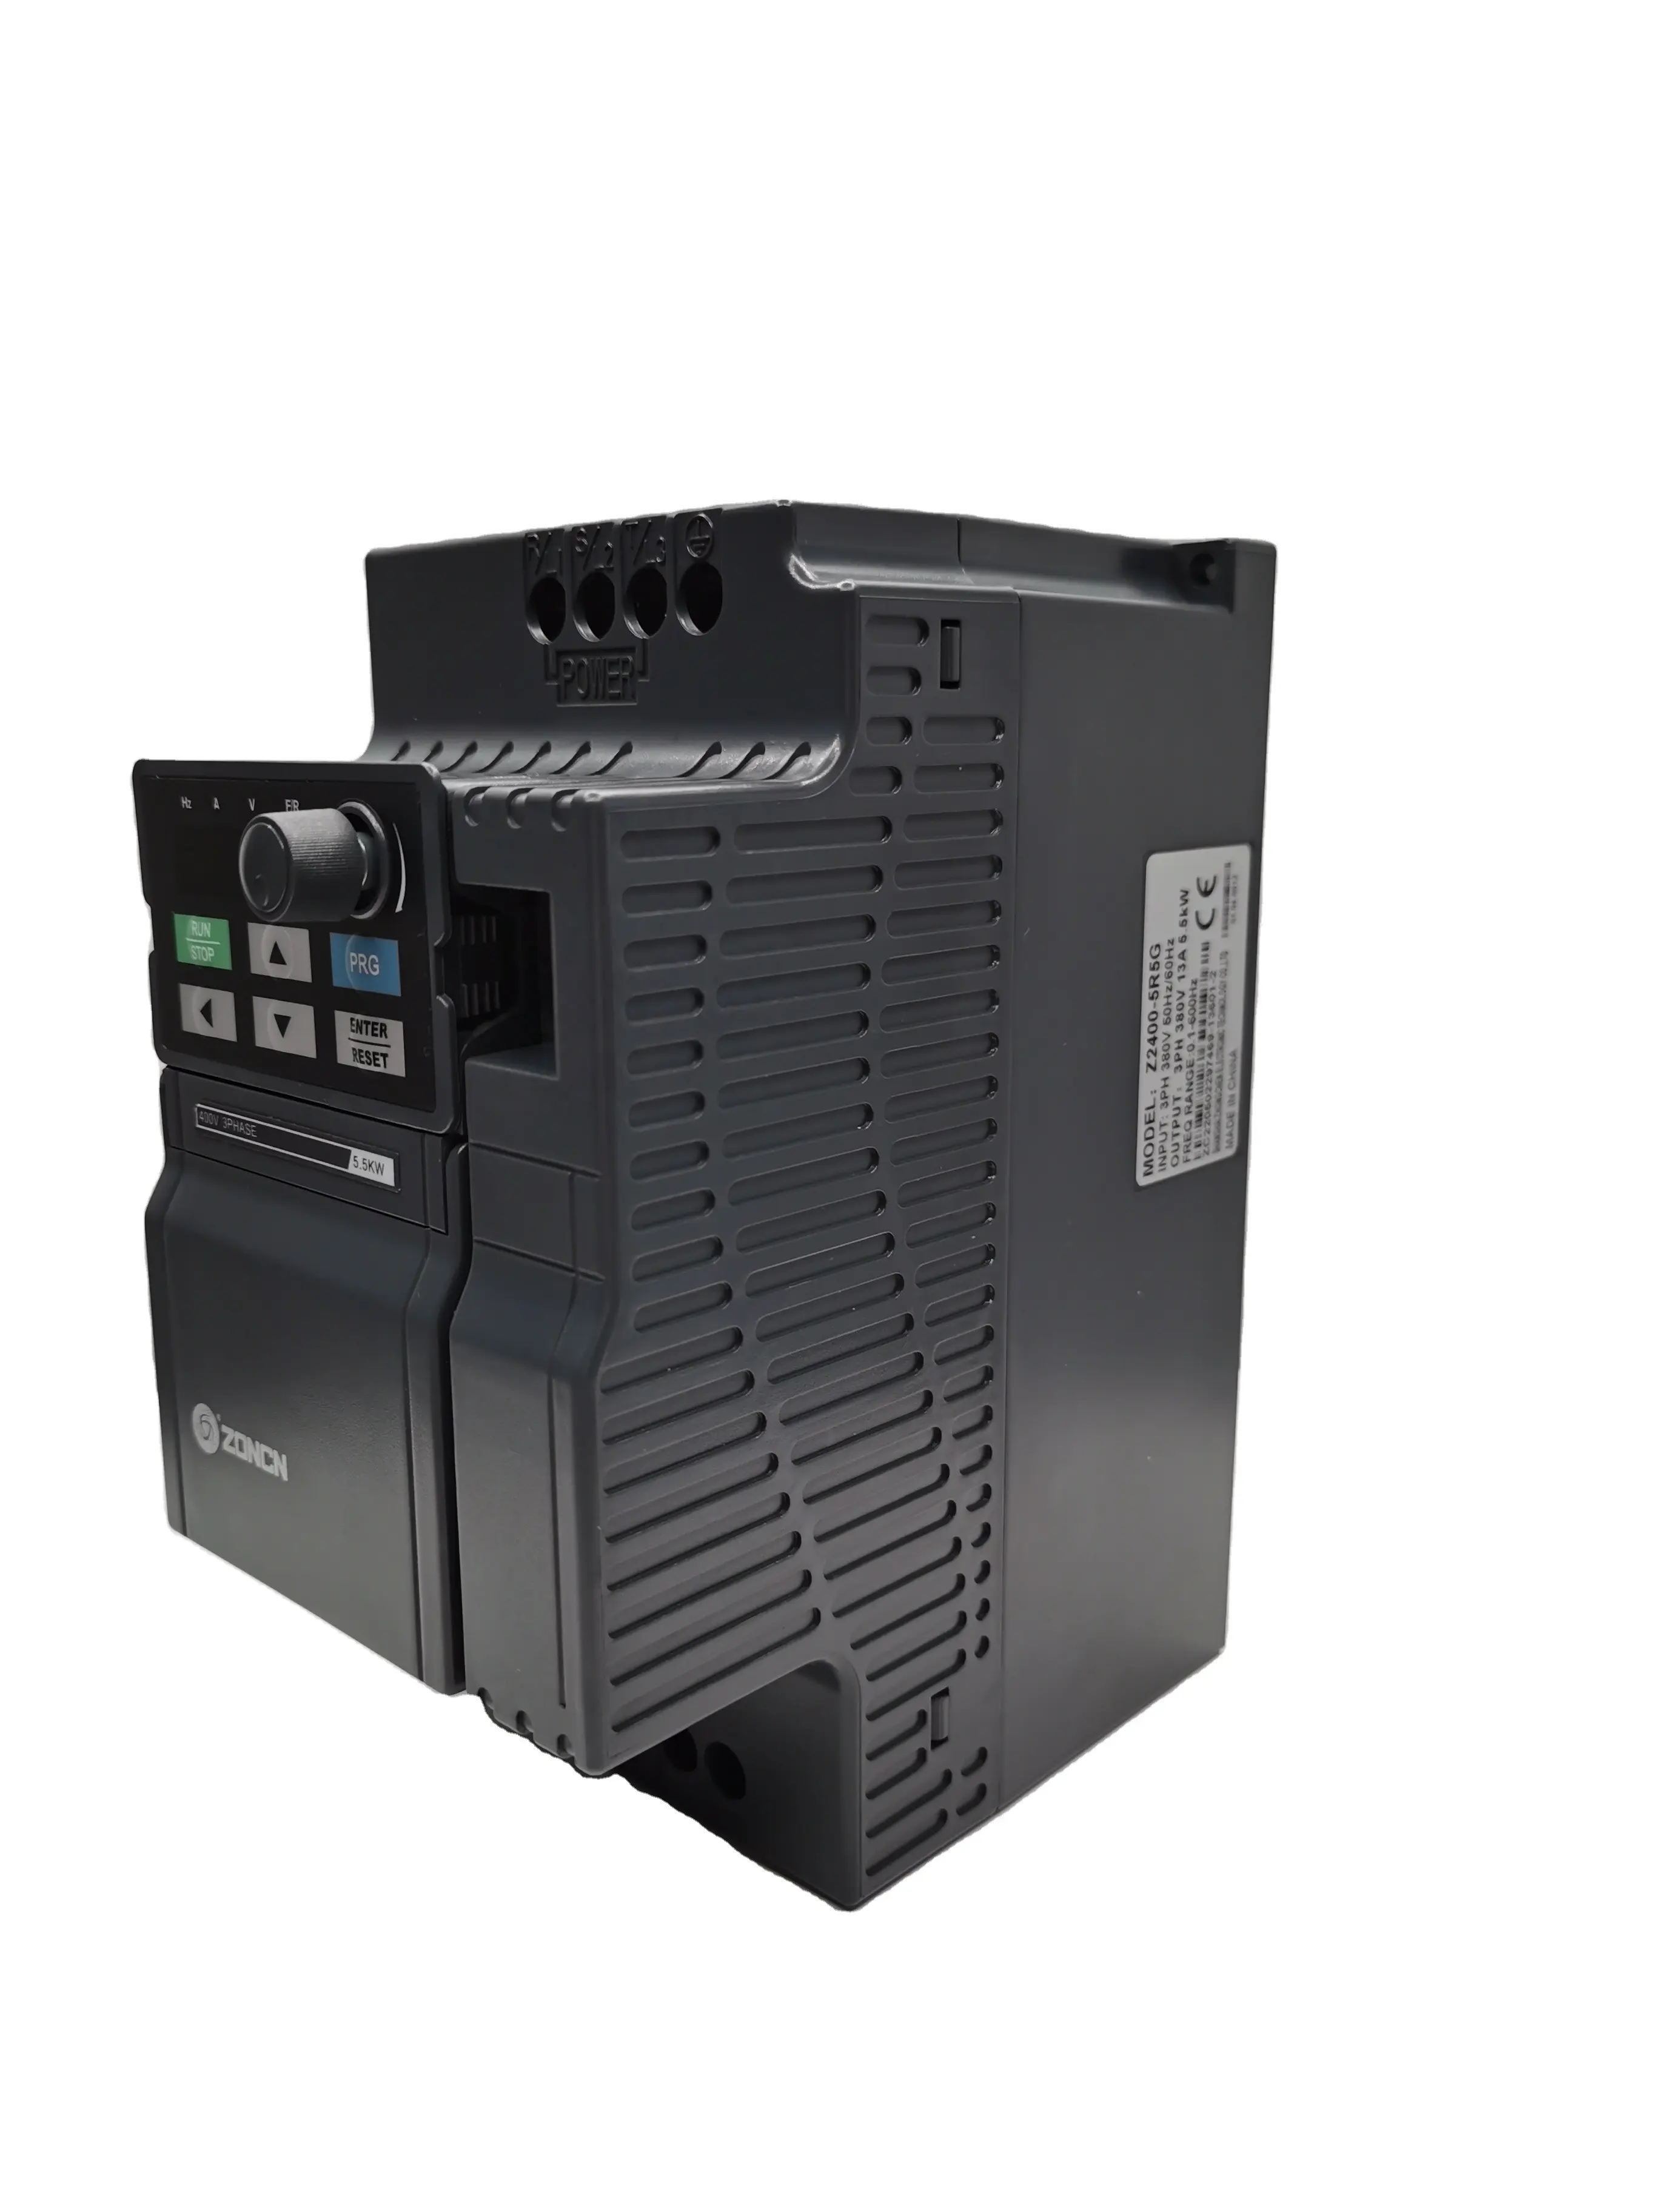 VFD 5.5kw 7.5kw 11kw 15kw frequency inverter 220V 380V 7hp 10hp 15hp variable frequency drive